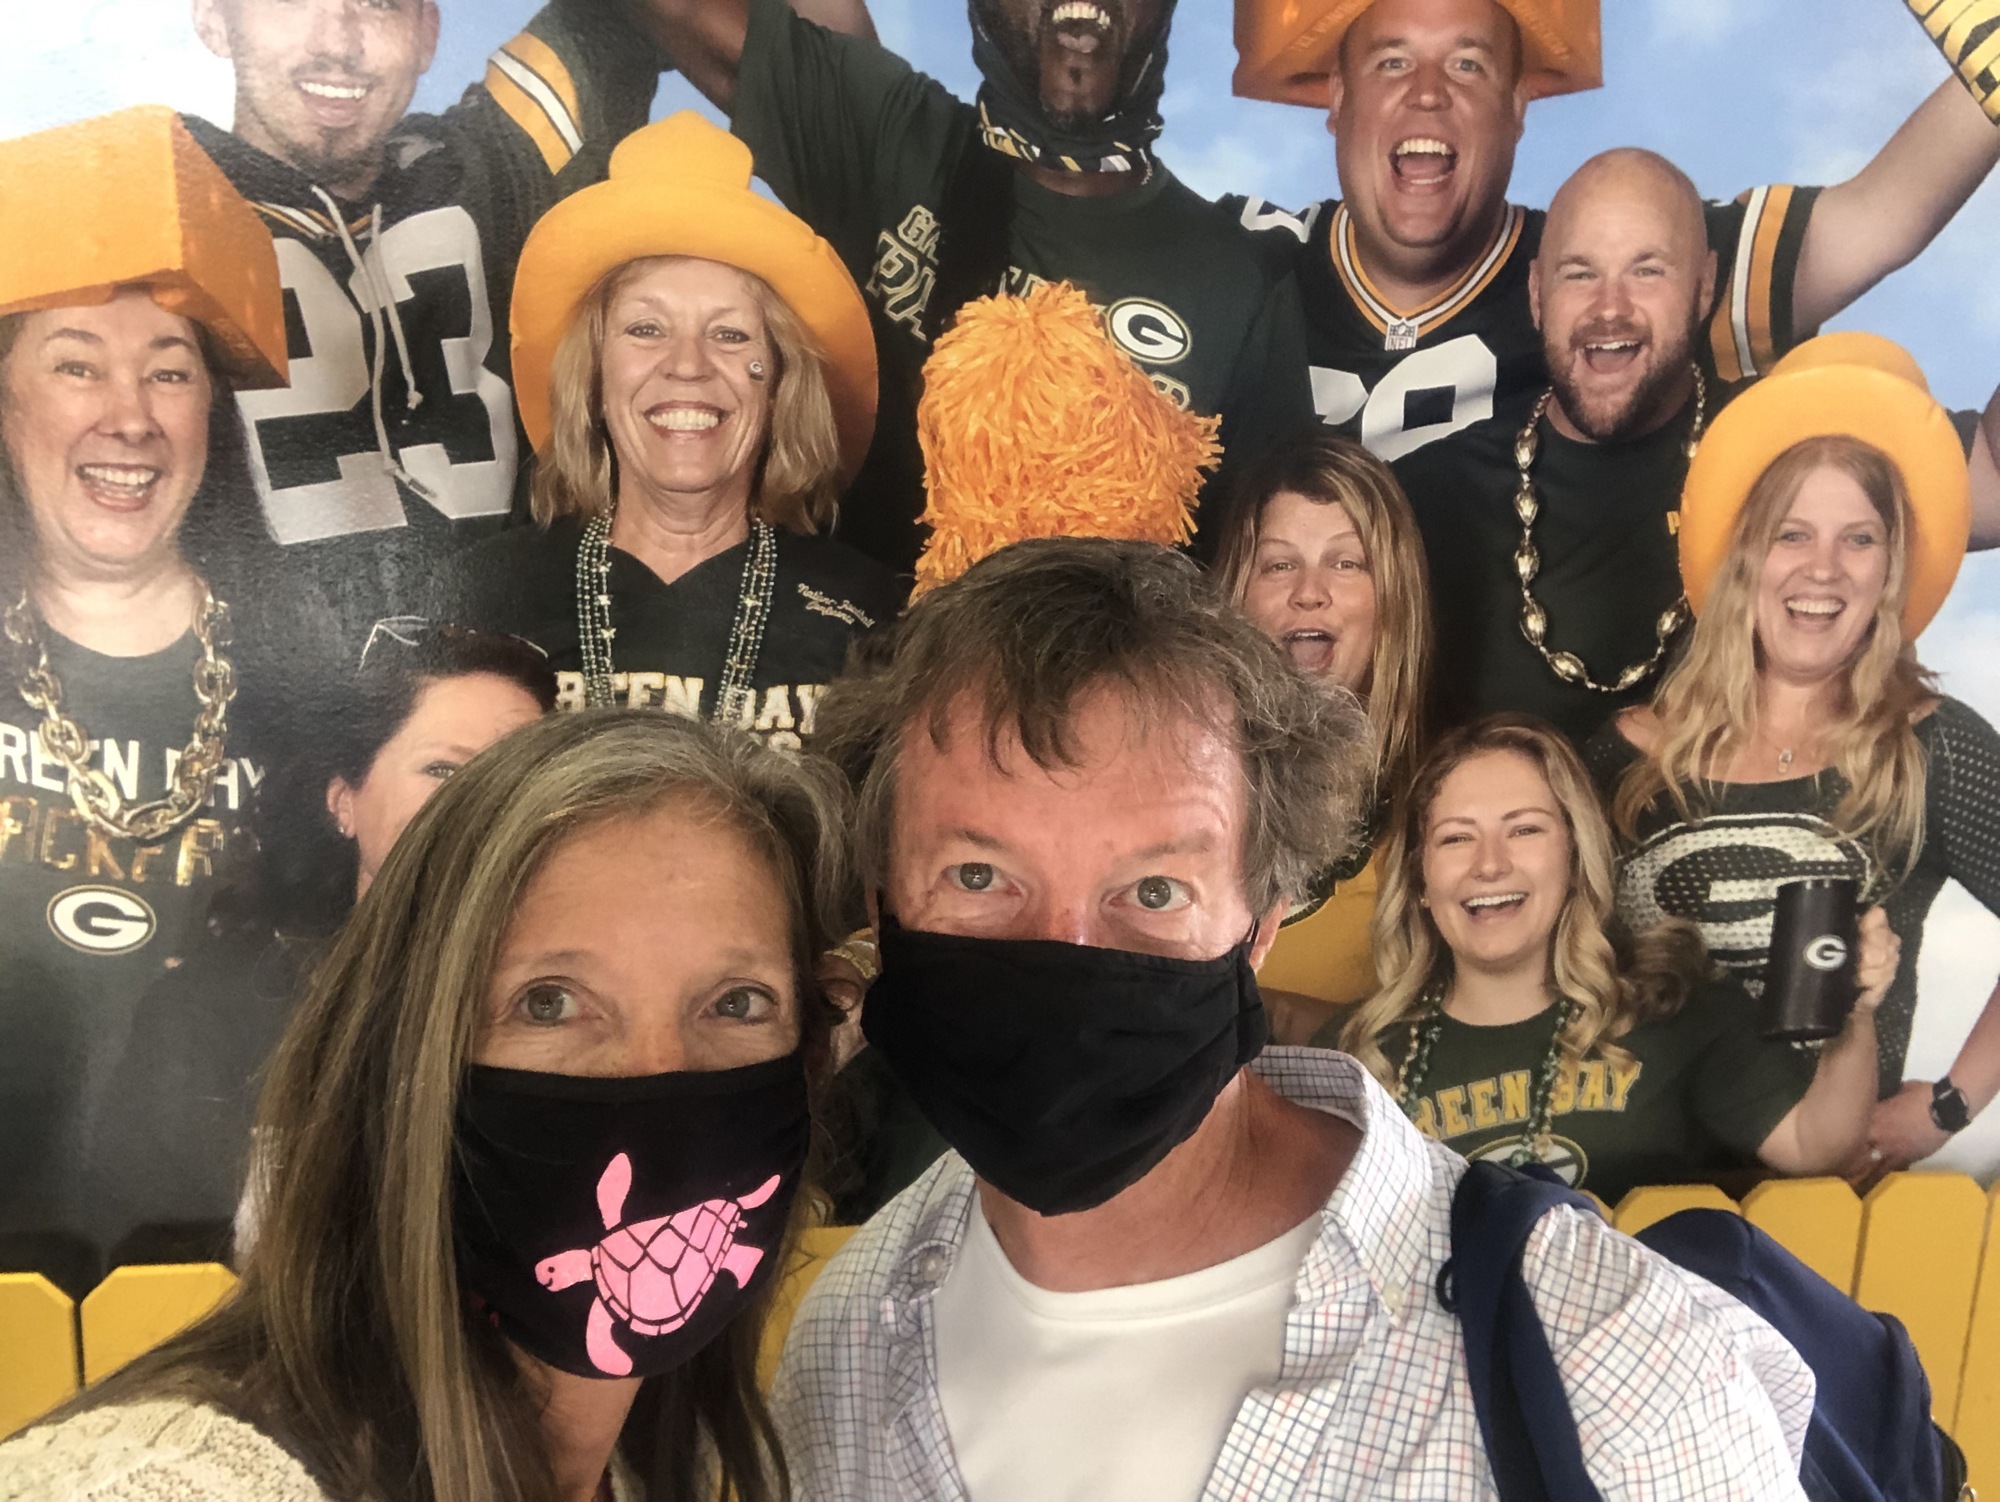 Cyndi and Mike Seamon snap a photo with some cheeseheads on the way to family vacation in Wisconsin. courtesy photo.